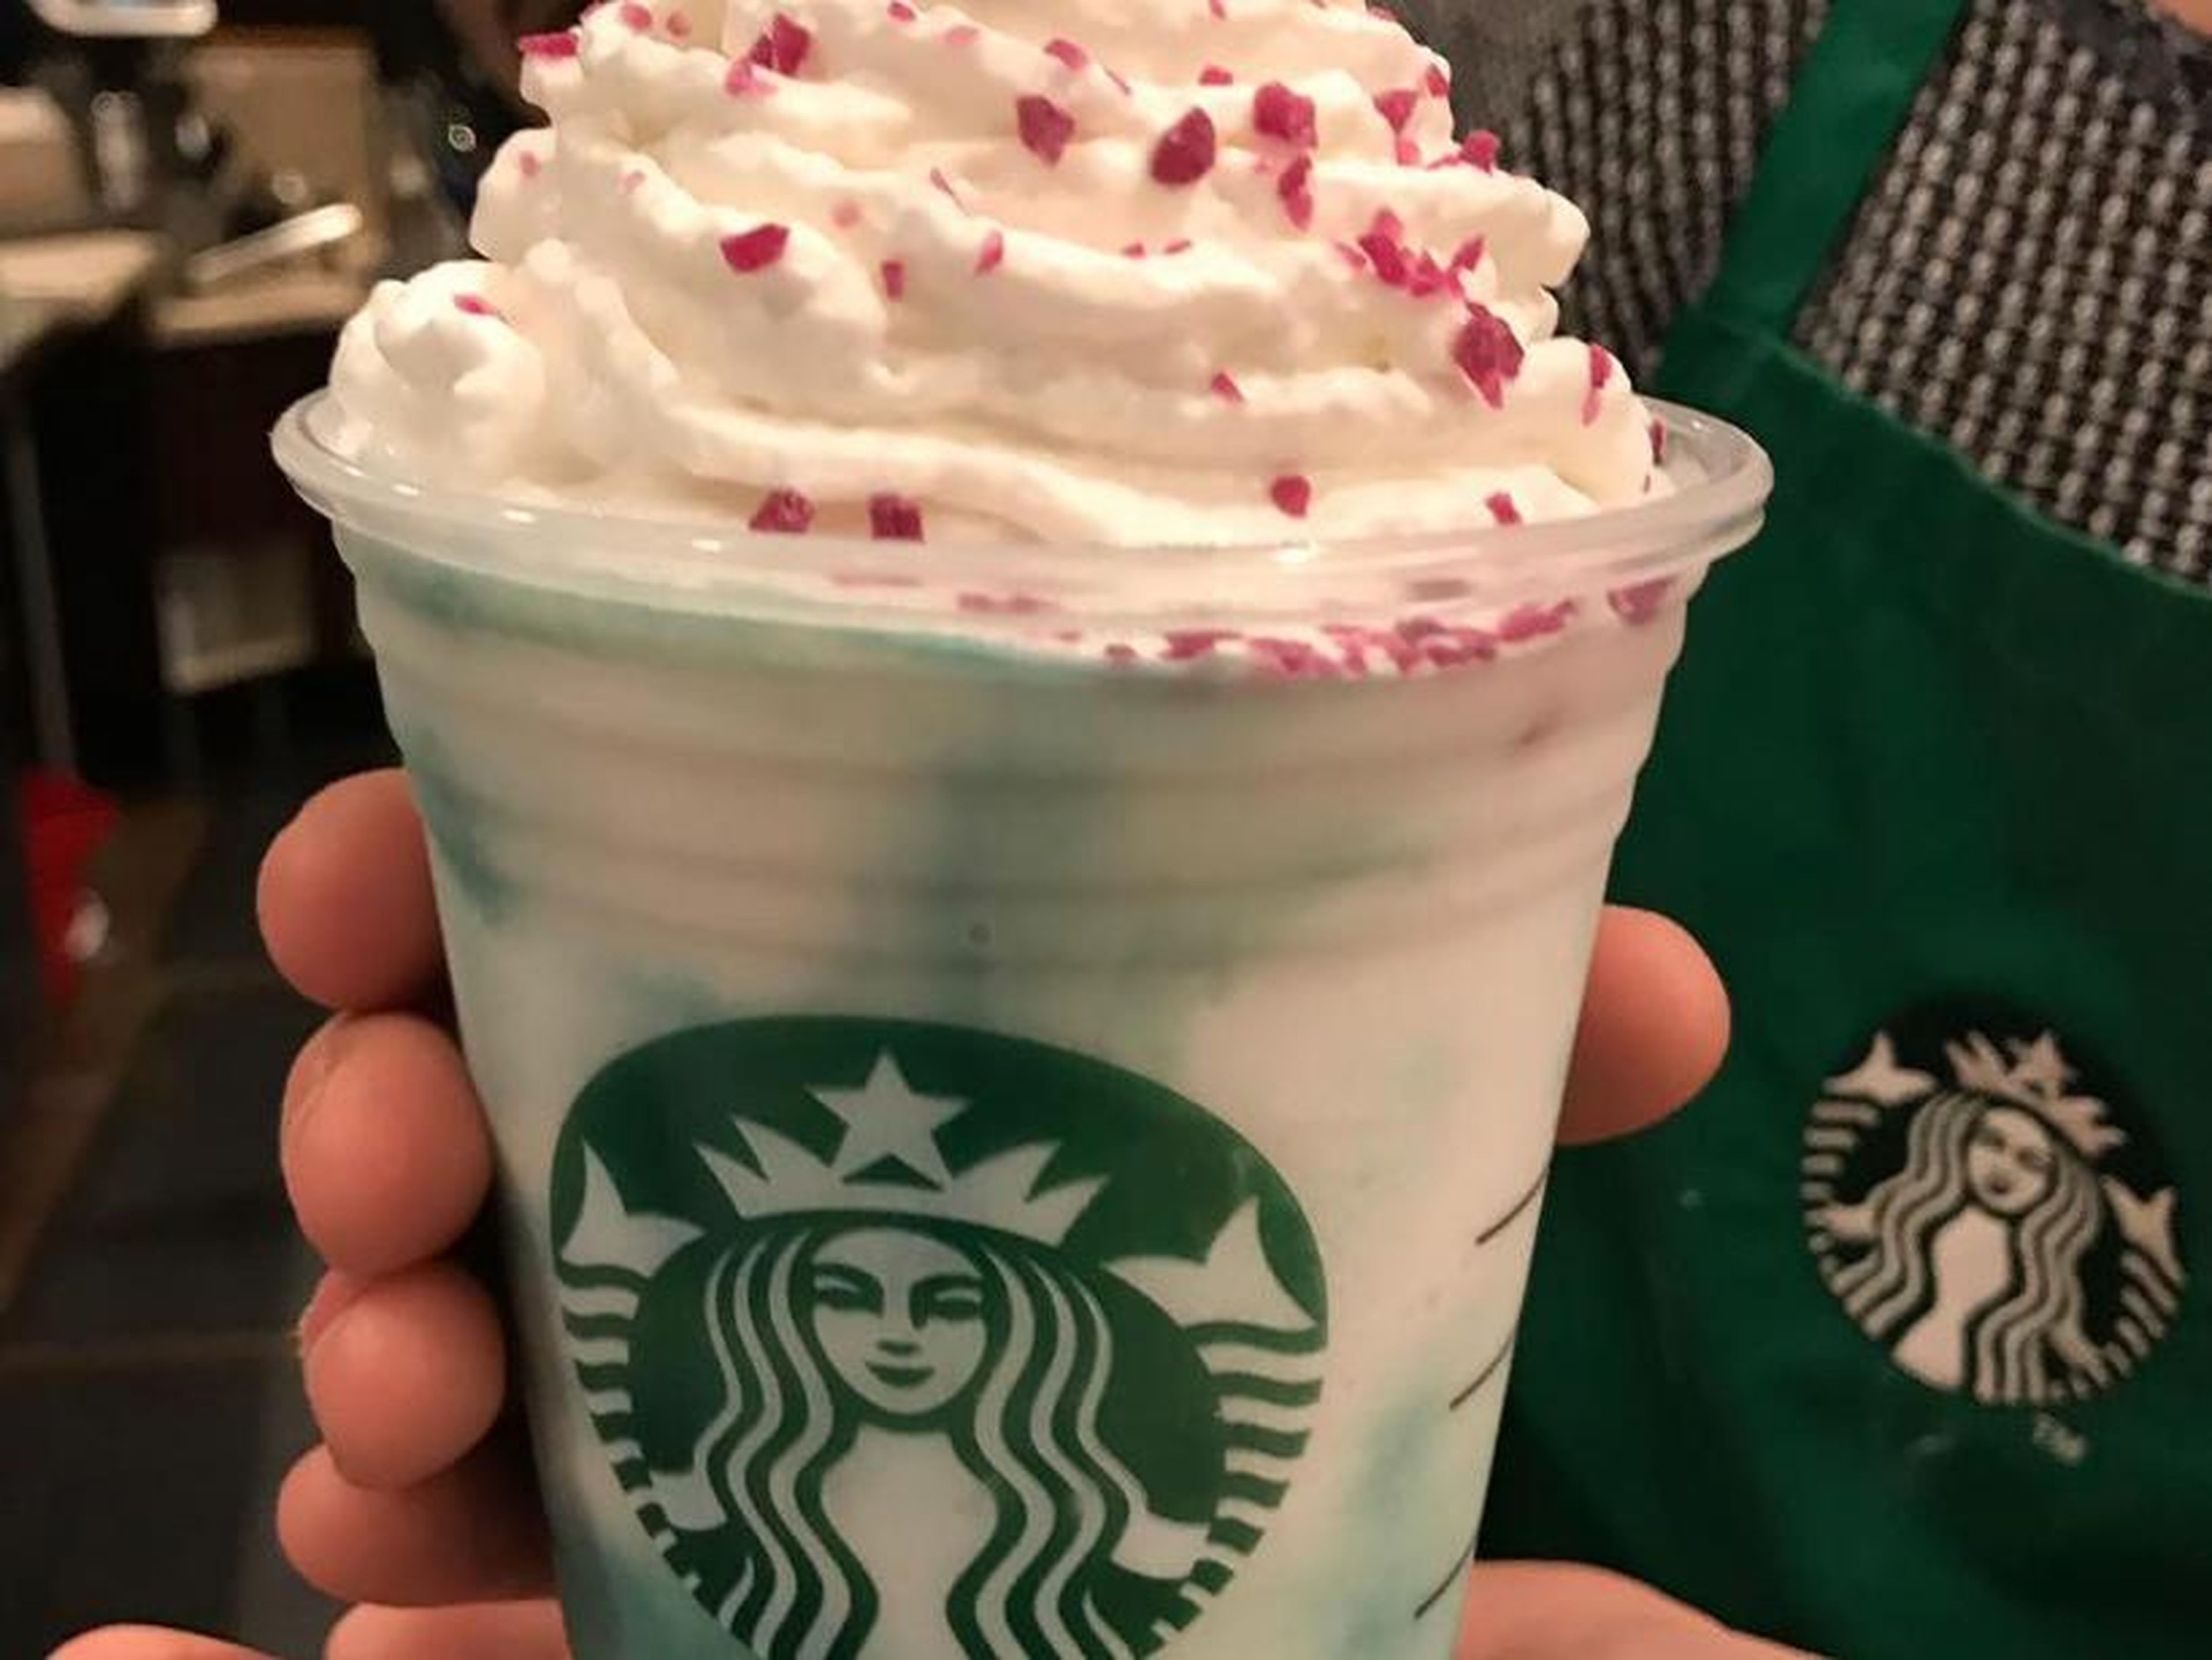 Young people are dumping Starbucks ahead of earnings